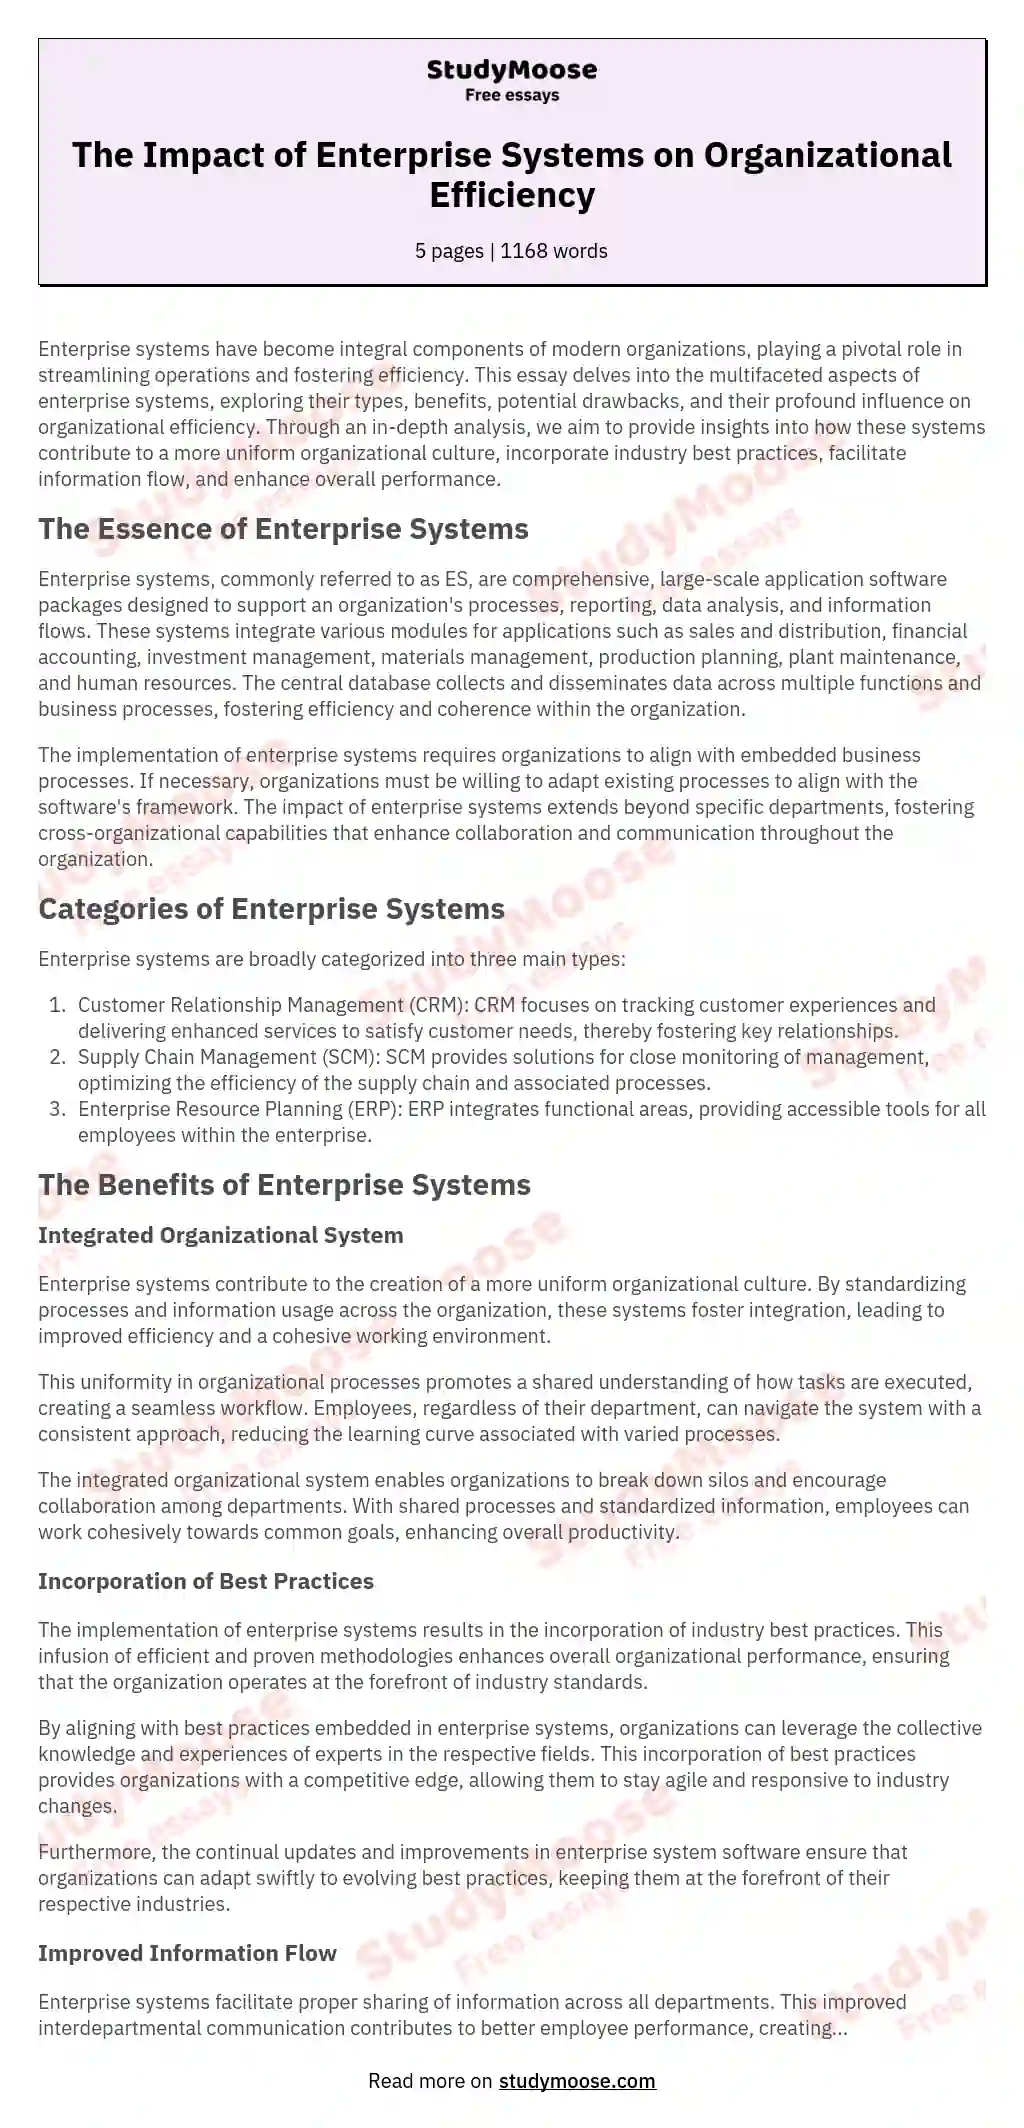 Describe at least two benefits if using enterprise systems